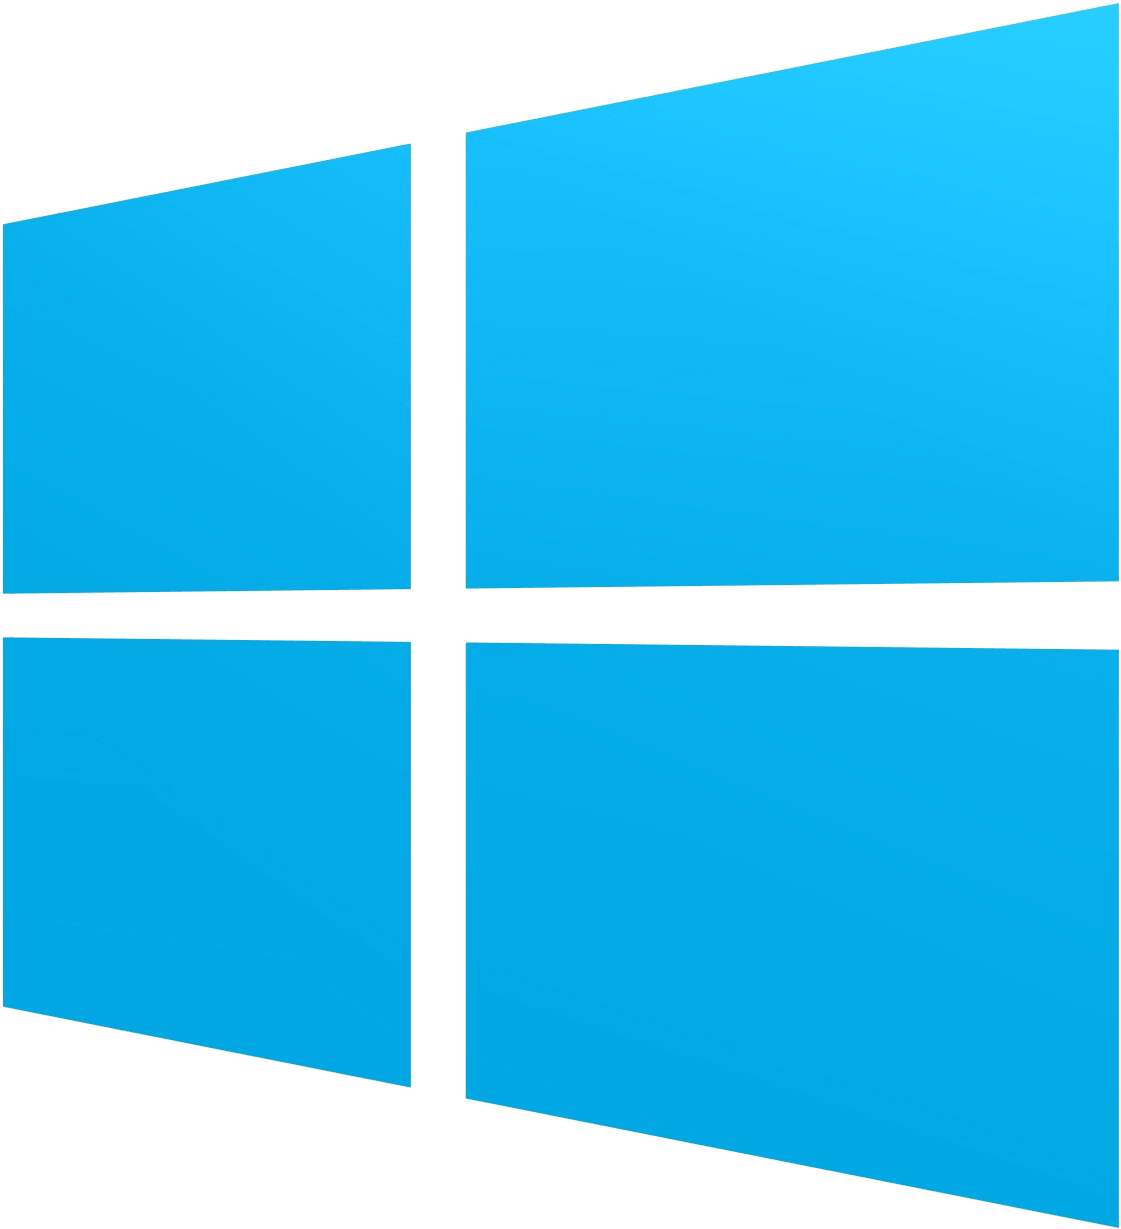 enable-kill-switch-on-windows-in-Germany